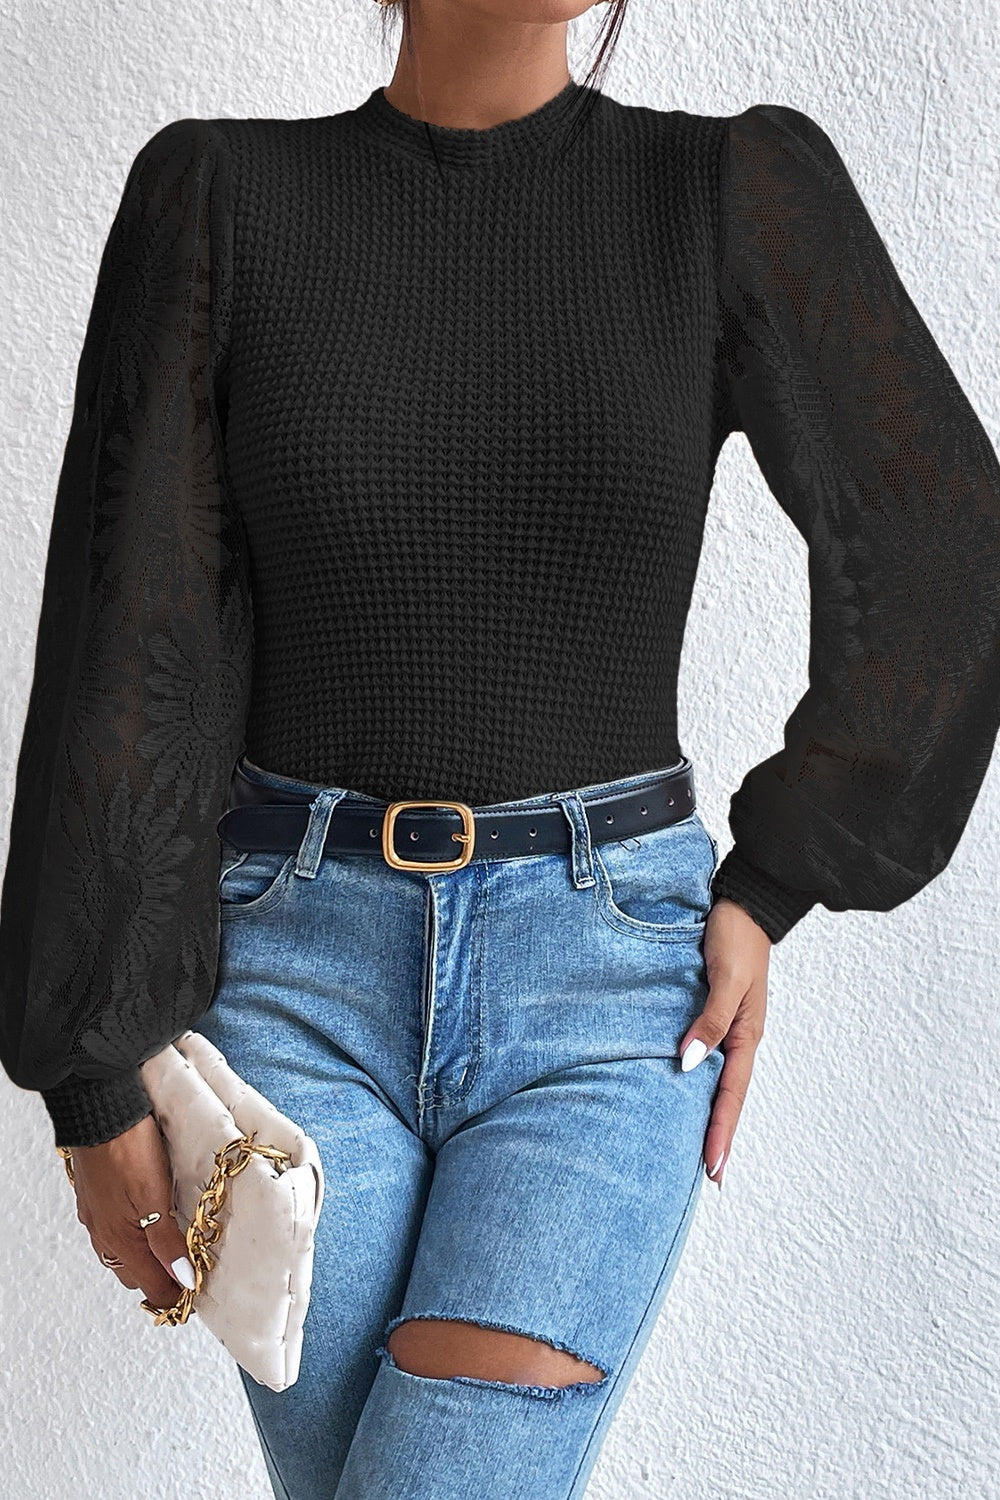 Floral Lace Detail Lantern Sleeve Blouse - Black / S - Women’s Clothing & Accessories - Shirts & Tops - 4 - 2024